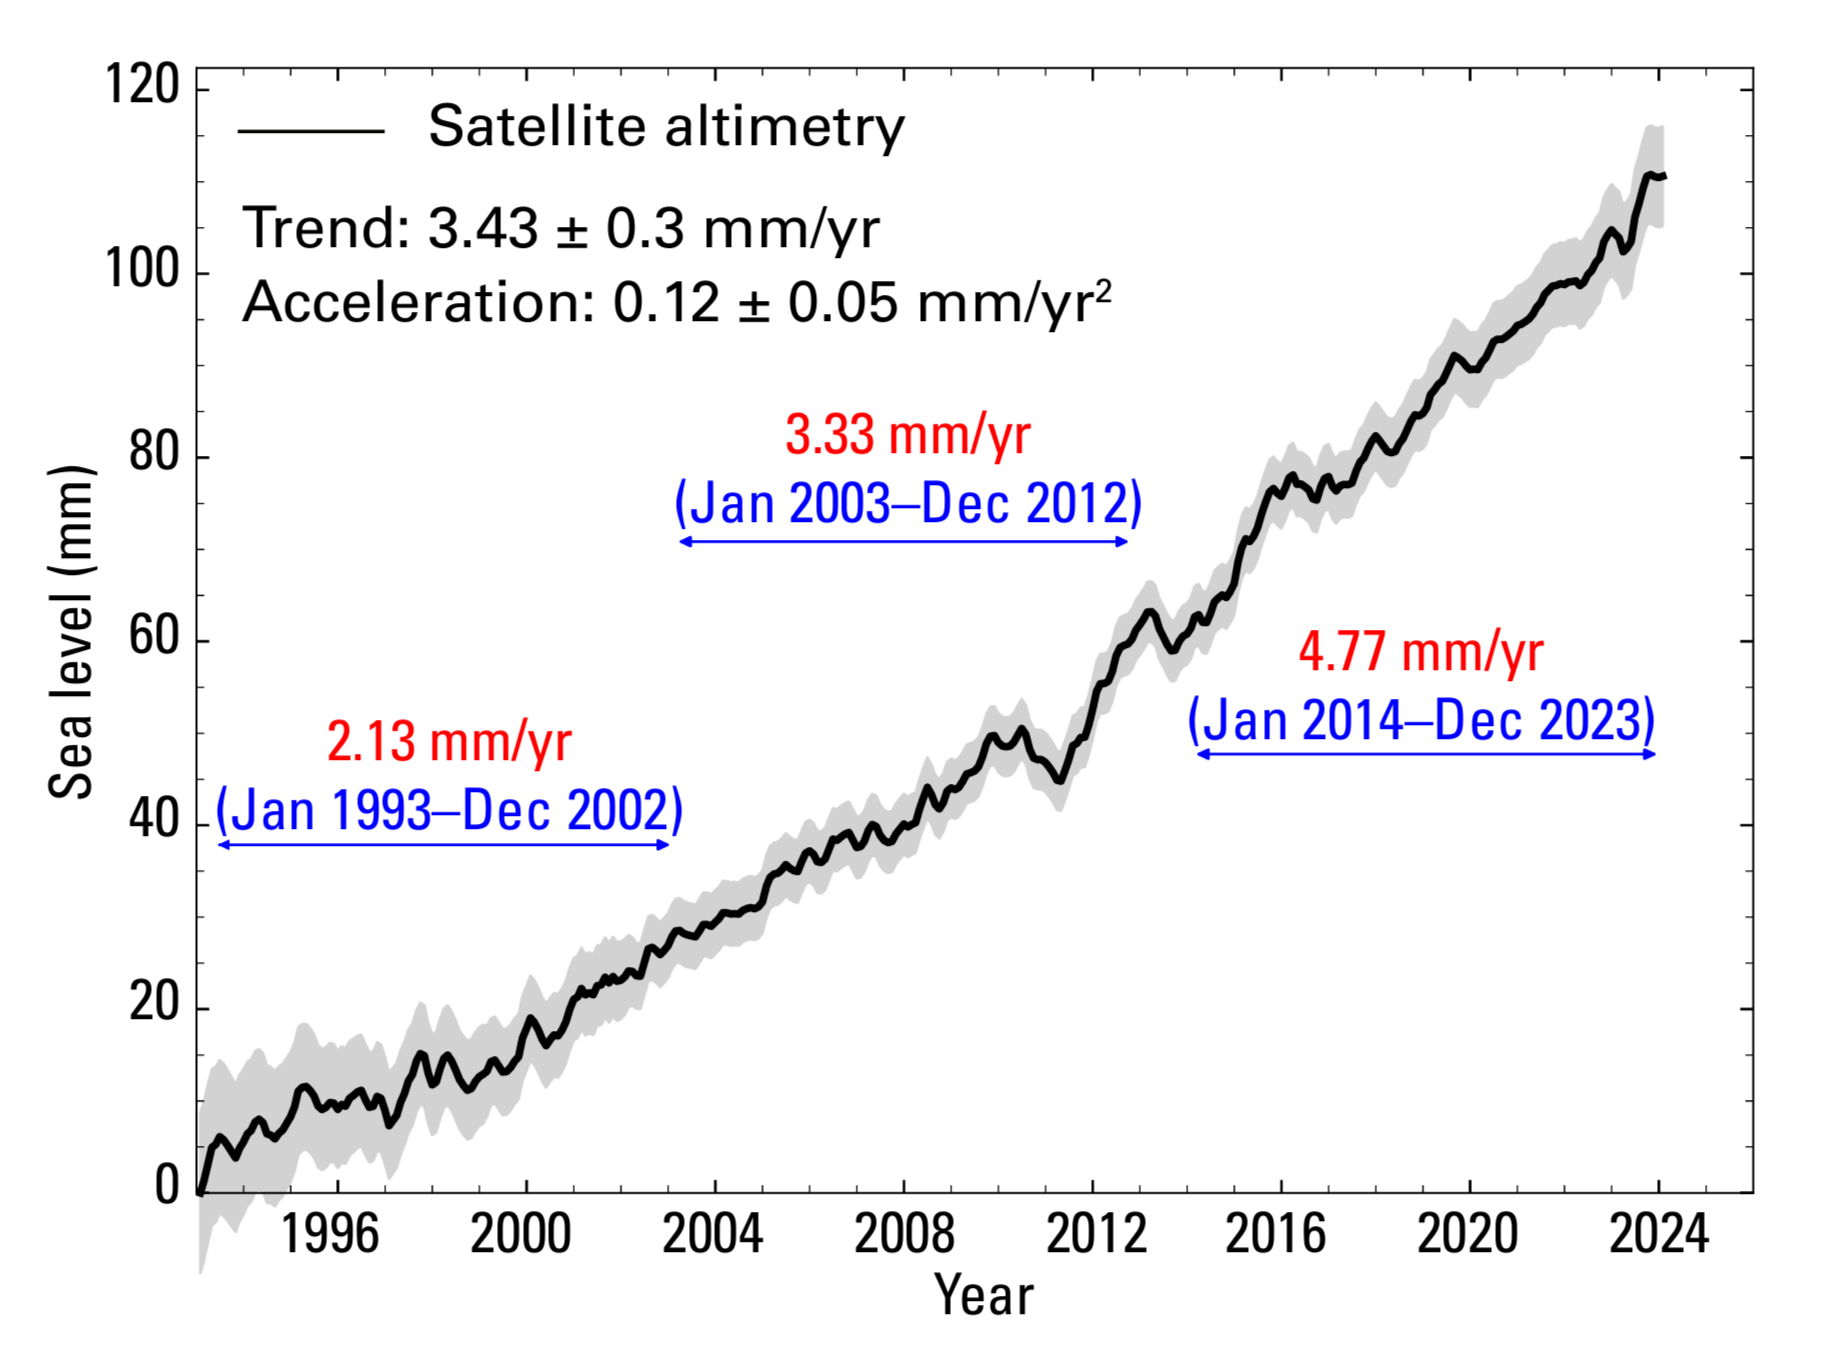 Global mean sea level (GMSL) evolution between January 1993 and December 2023 based on satellite altimetry. The black line is the best estimate, and the grey shaded area indicates uncertainty. Red and blue annotations indicate the average rate of sea-level rise during three decades of the record as indicated. In 2023, global mean sea level reached a record high in the satellite record (from 1993 to present), reflecting continued ocean warming as well as the melting of glaciers and ice sheets. The rate of global mean sea-level rise in the past 10 years (2014-2023) is more than twice the rate of sea-level rise in the first decade of the satellite record (1993-2002). Data: AVISO altimetry. Graphic: WMO